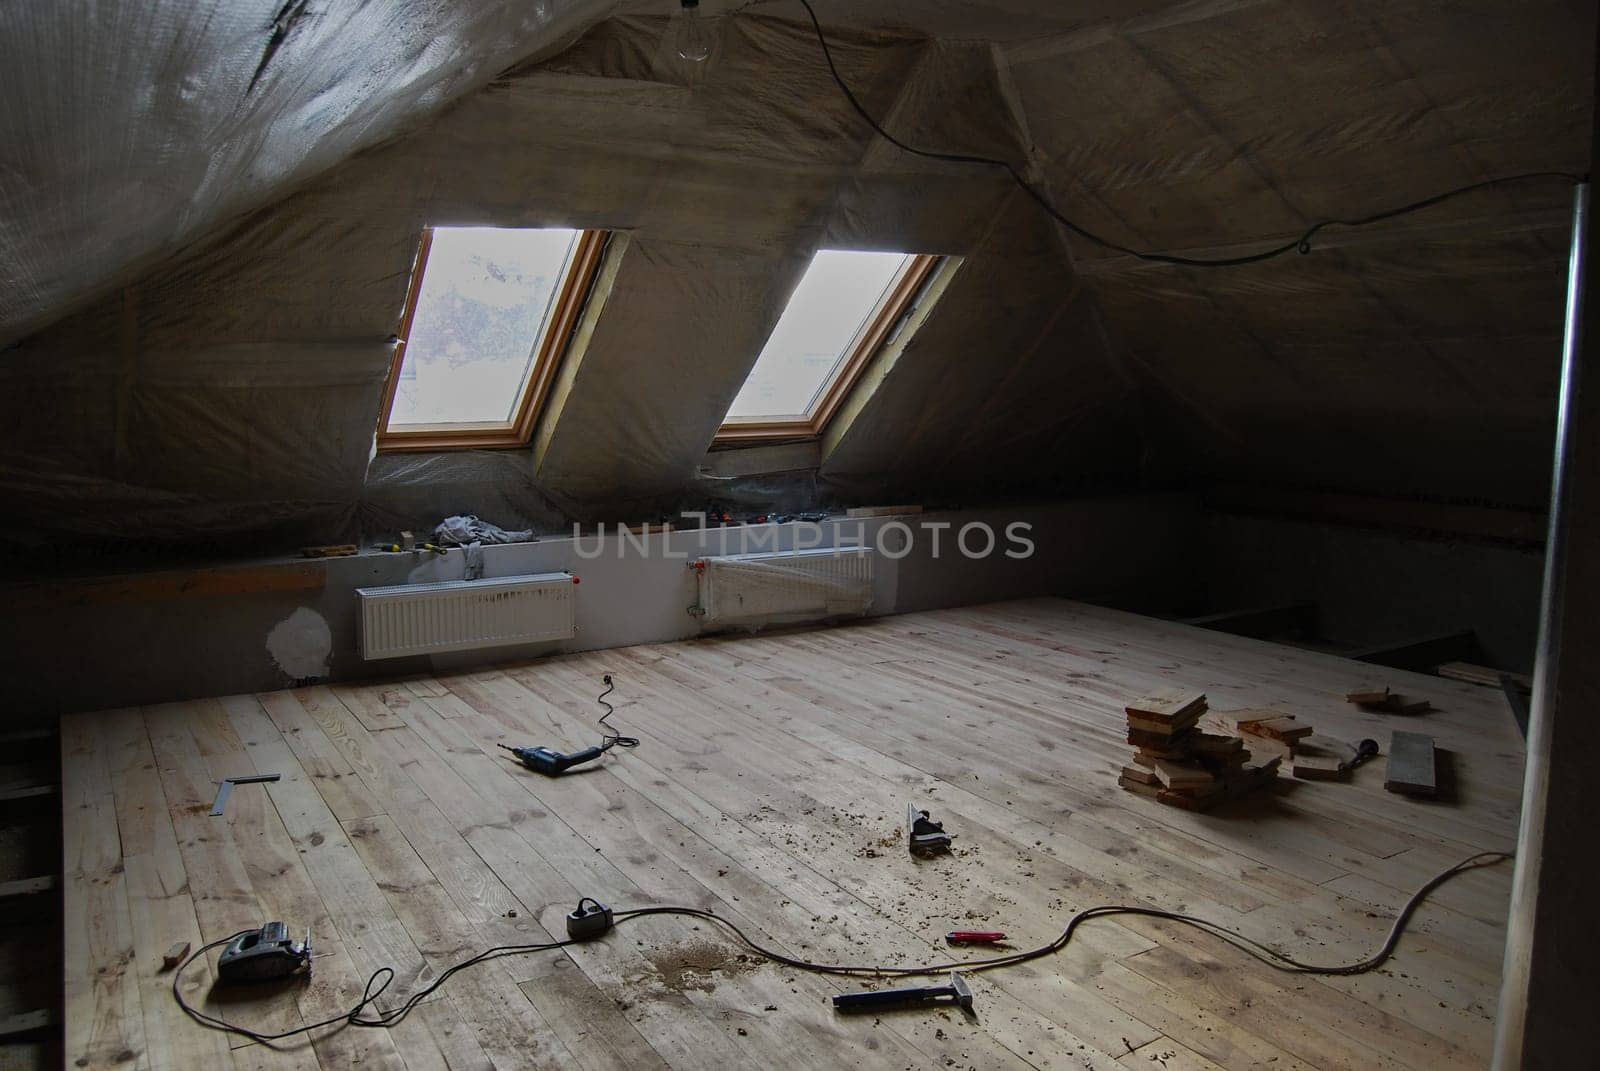 Insulating the room and laying floorboards.